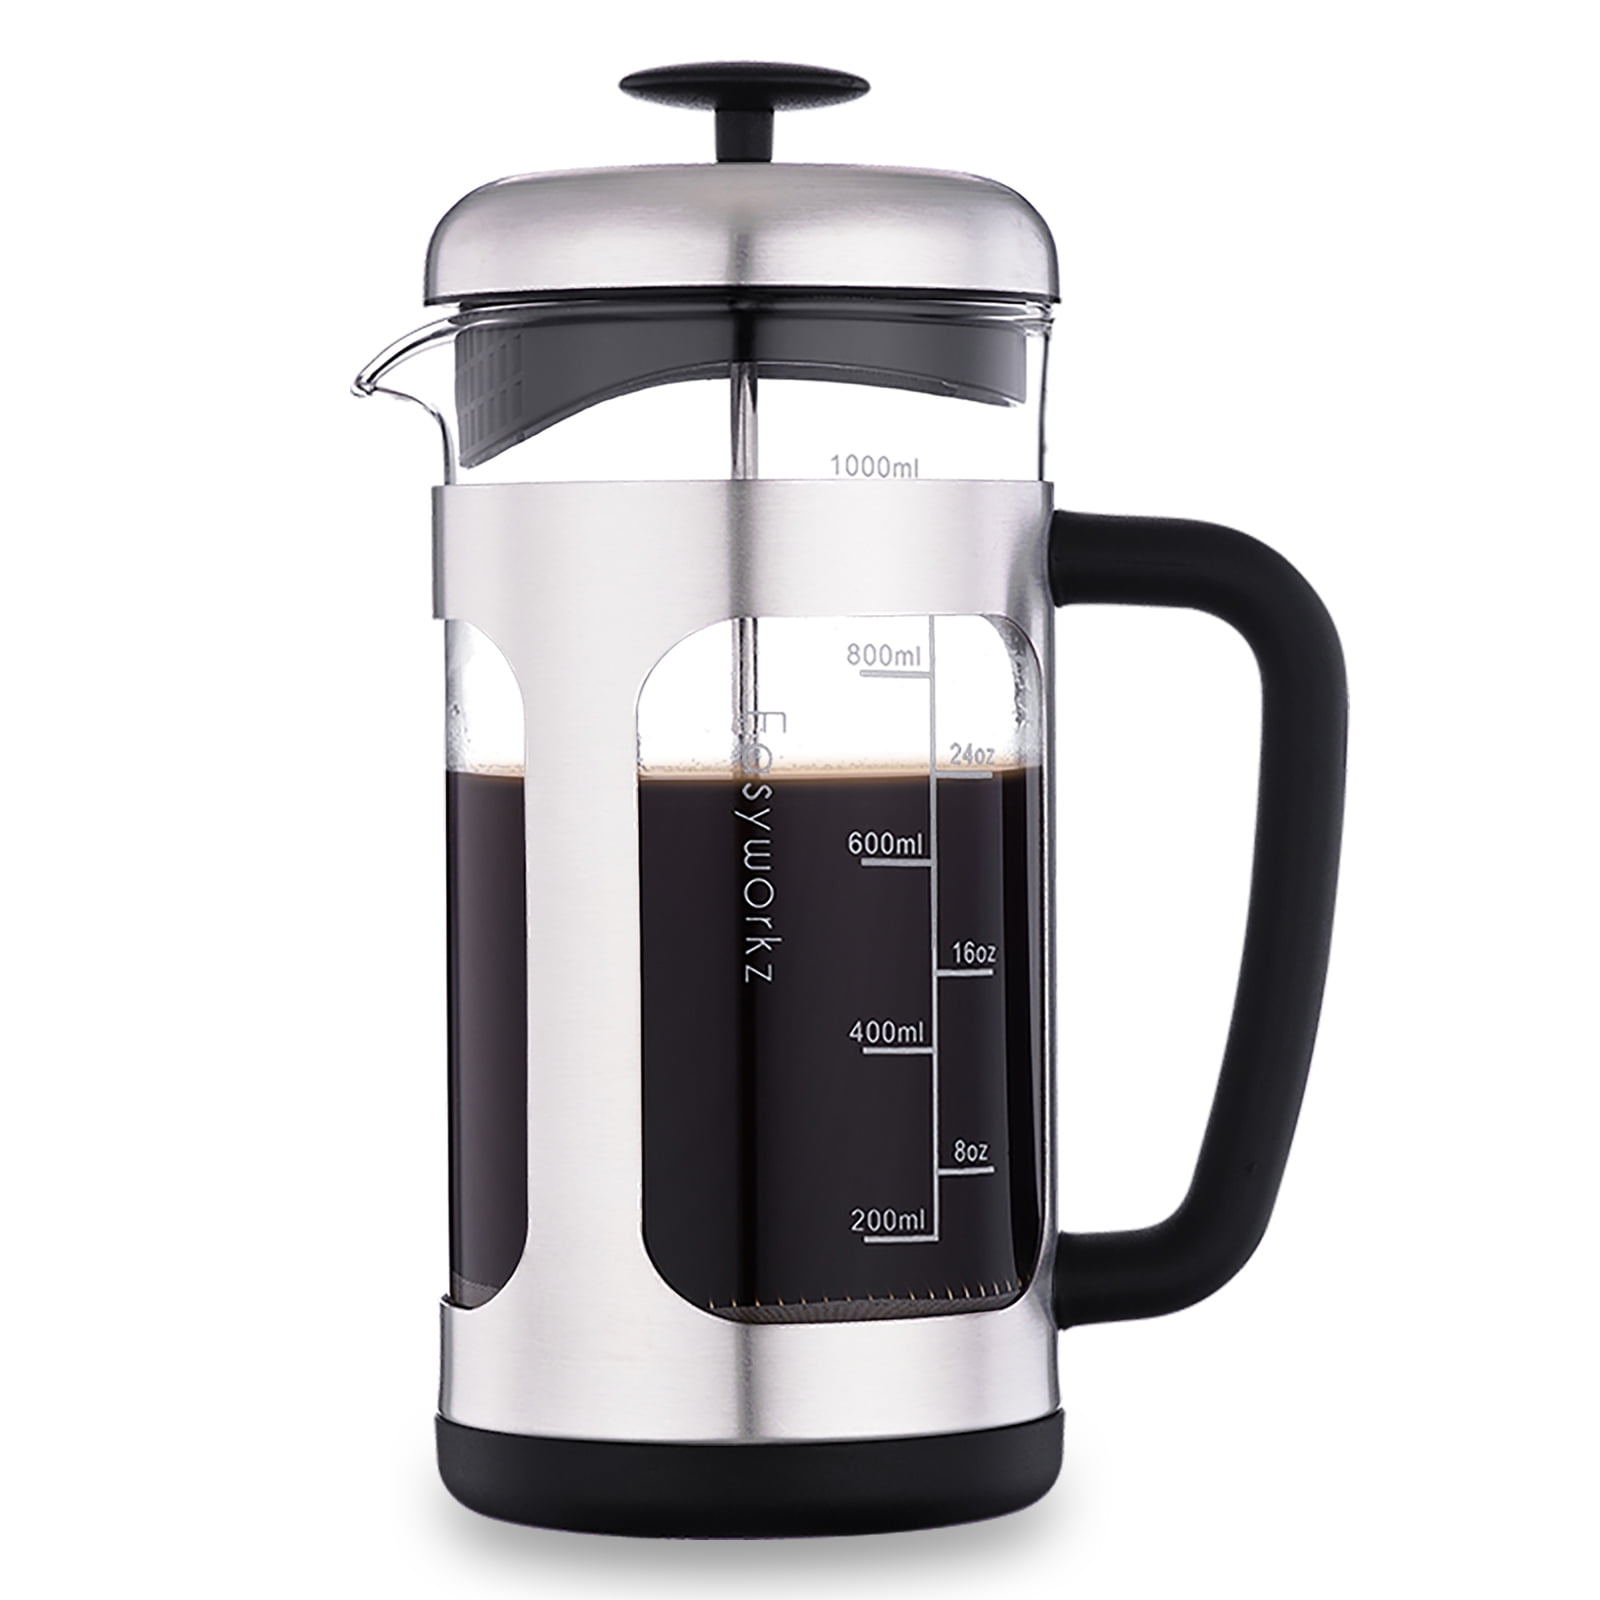 KitchenAid KCM4212SX Cold Brew Coffee Maker-Brushed 28 oz, Stainless Steel  883049446875